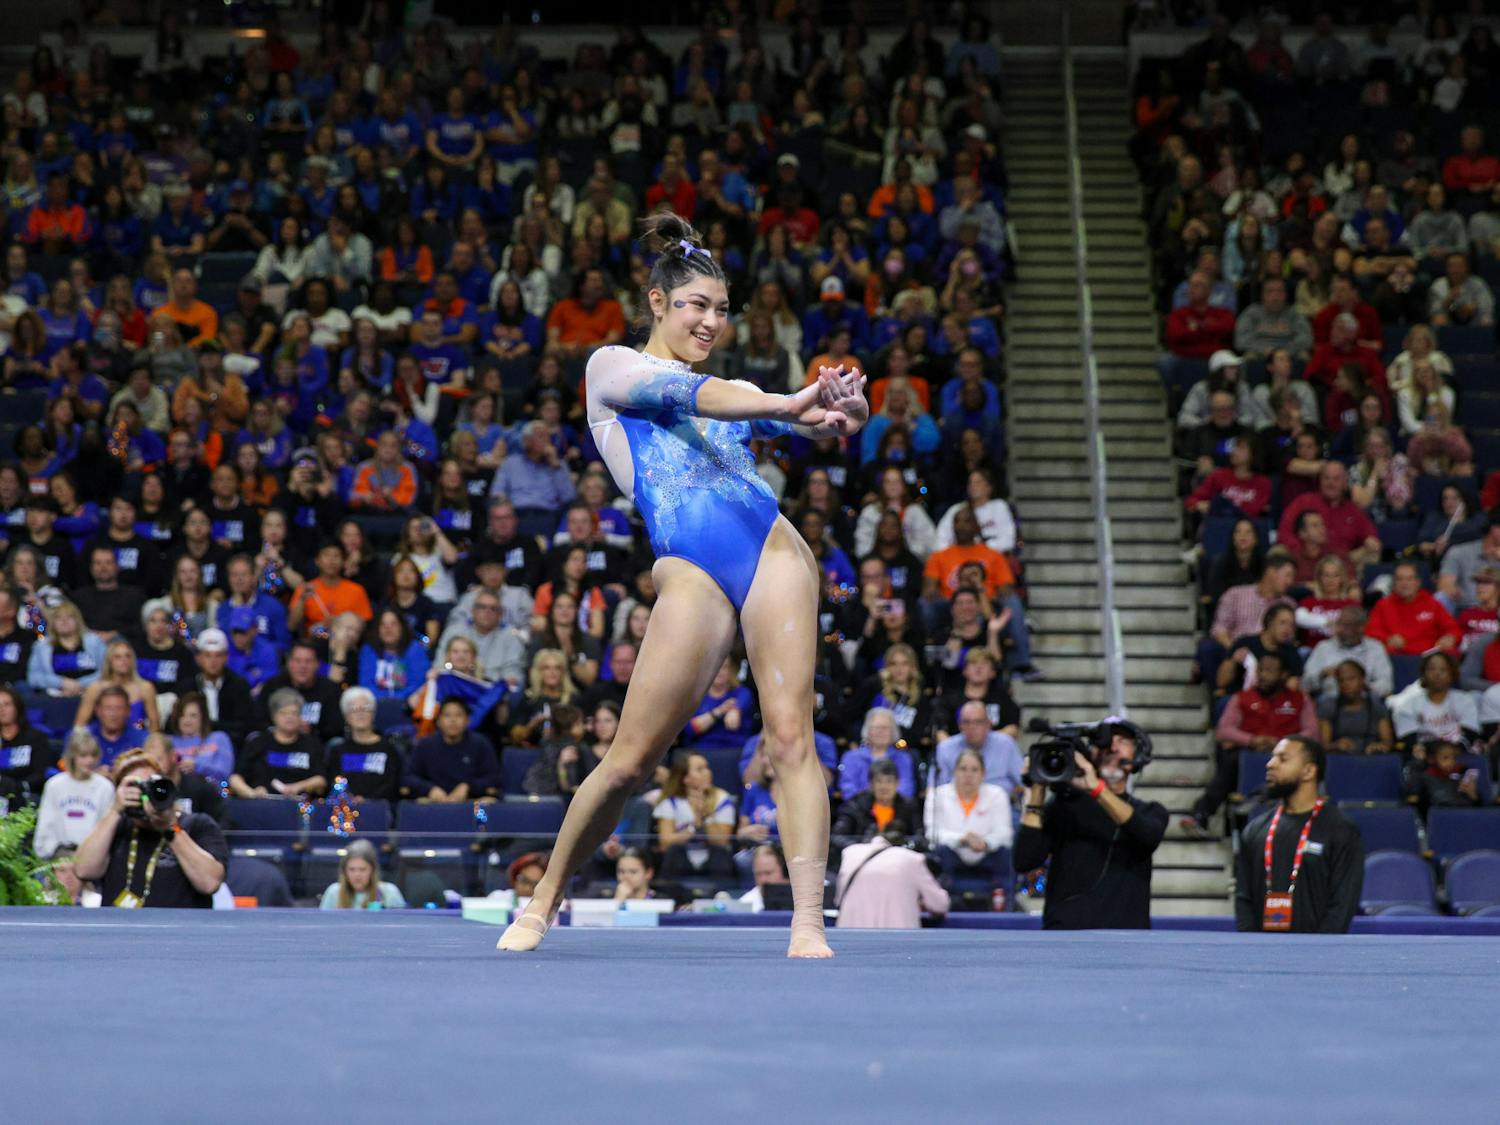 Florida freshman Kayla DiCello performs her floor routine during the Gators' win at the Southeastern Conference Championships Saturday, March 18, 2023.